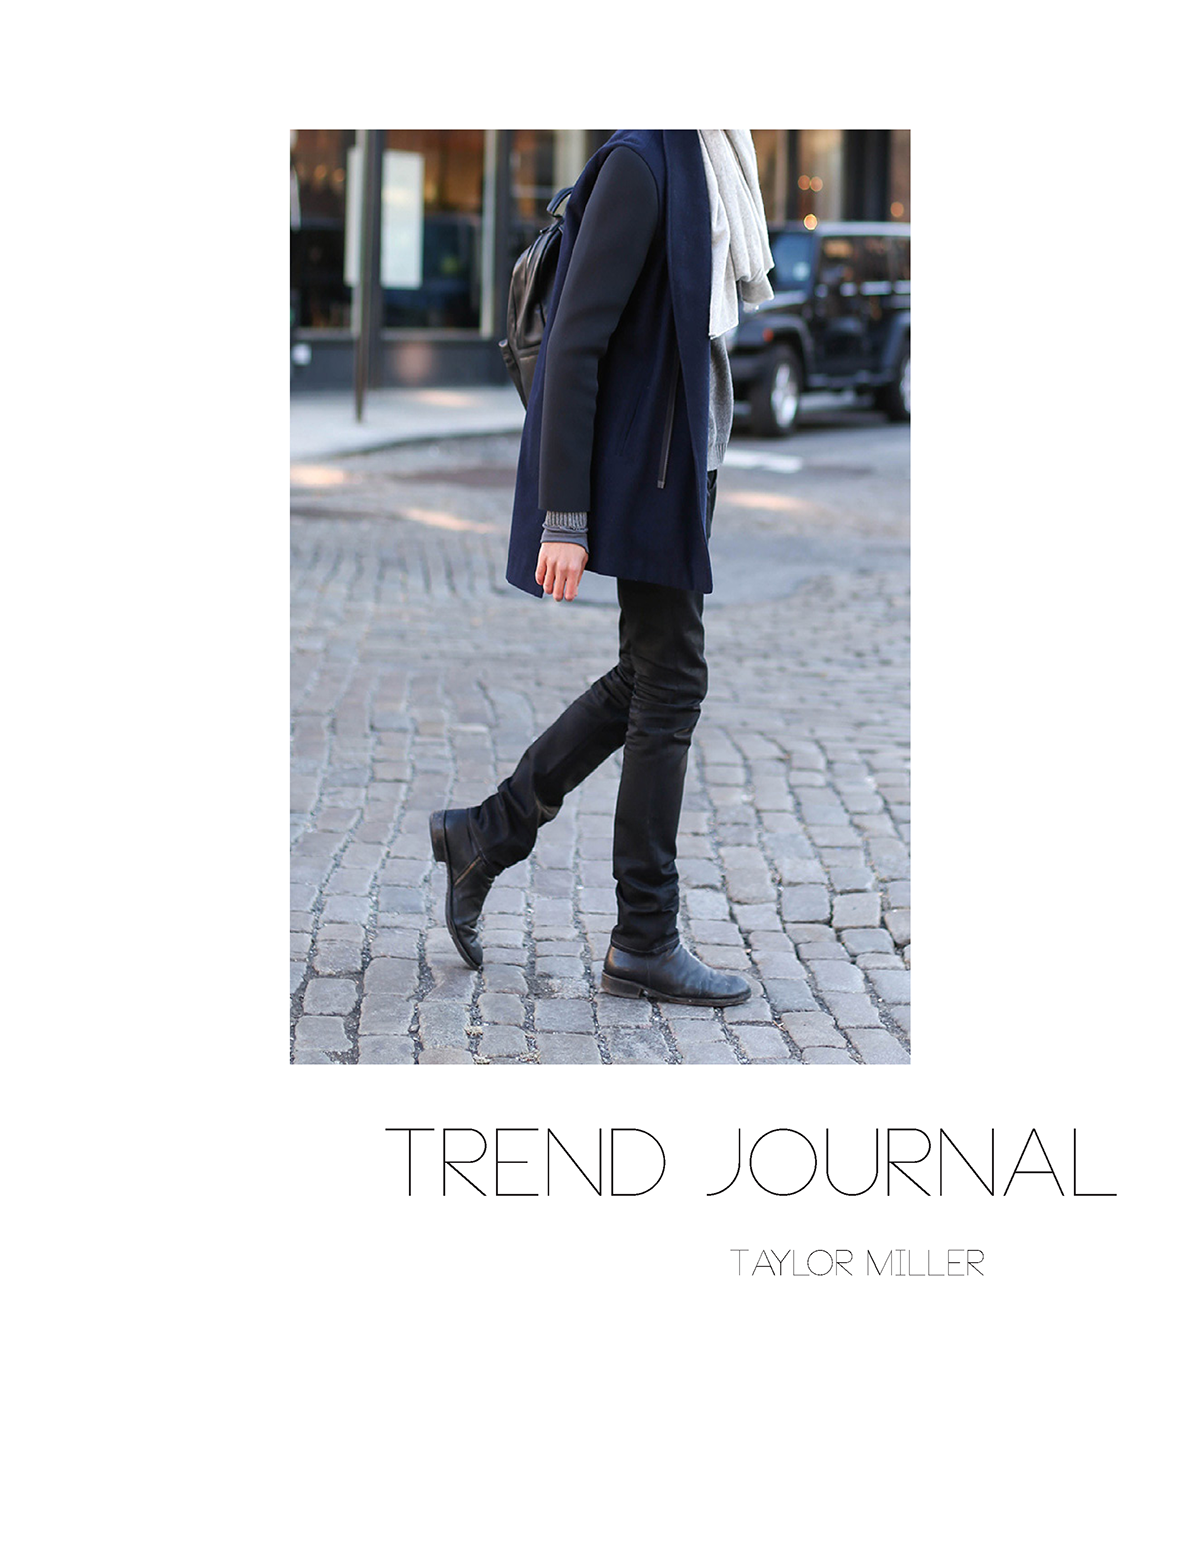 Trend Journal InDesign FASHION TRENDS editorial